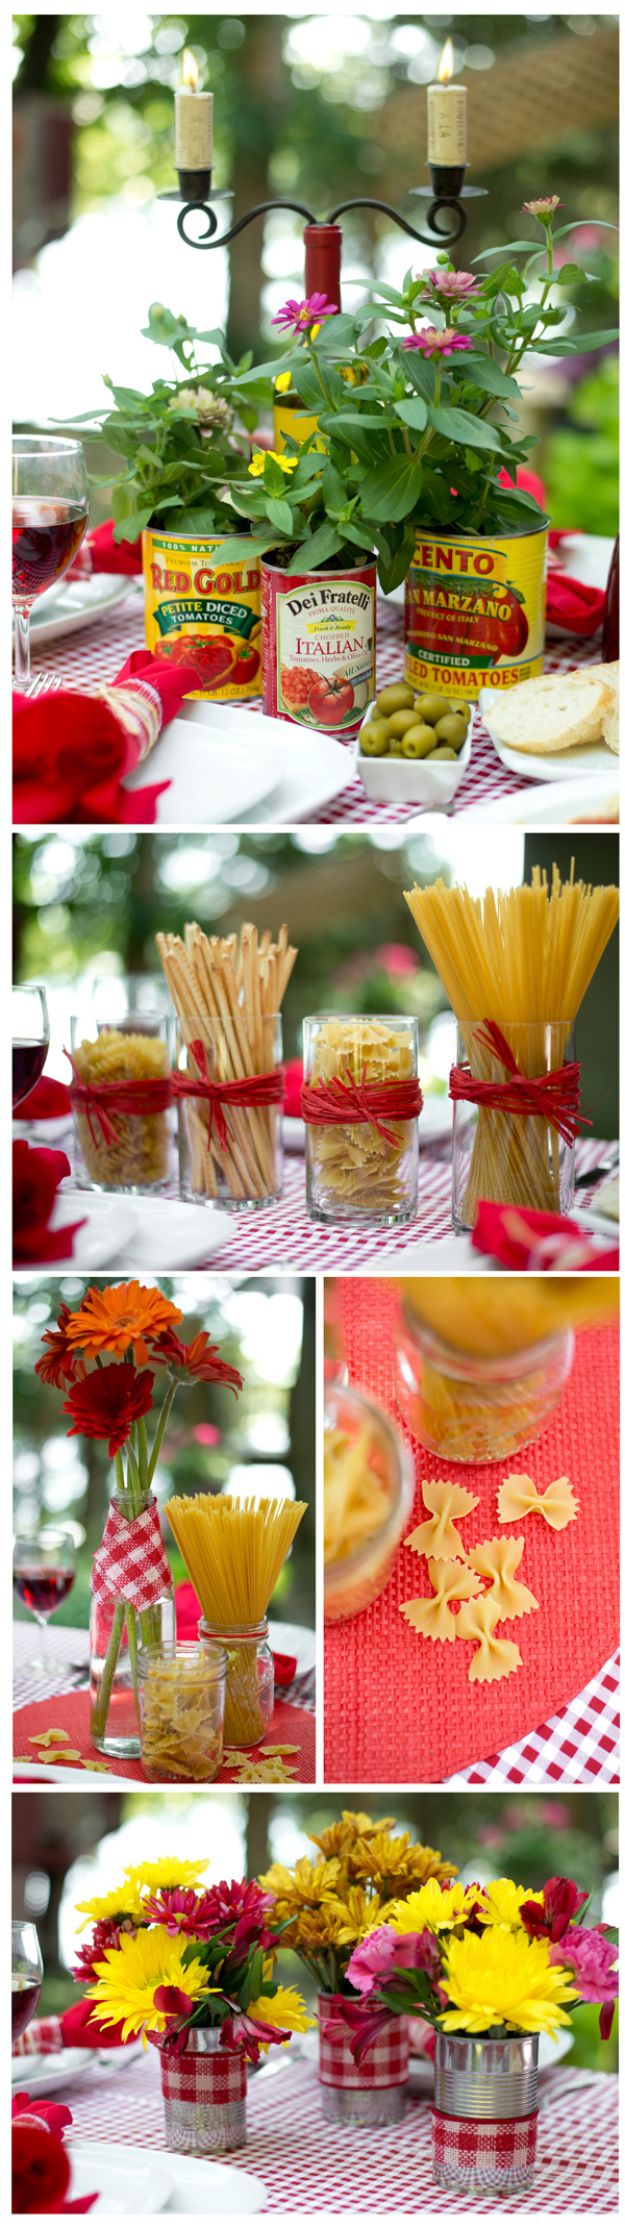 Best Dinner Party Ideas - Budget Centerpiece - Best Recipes for Foods to Serve, Casseroles, Finger Foods, Desserts and Appetizers- Place Settings and Cards, Centerpieces, Table Decor and Recipe Ideas for Supper Clubs and Dinner Parties http://diyjoy.com/best-dinner-party-ideas